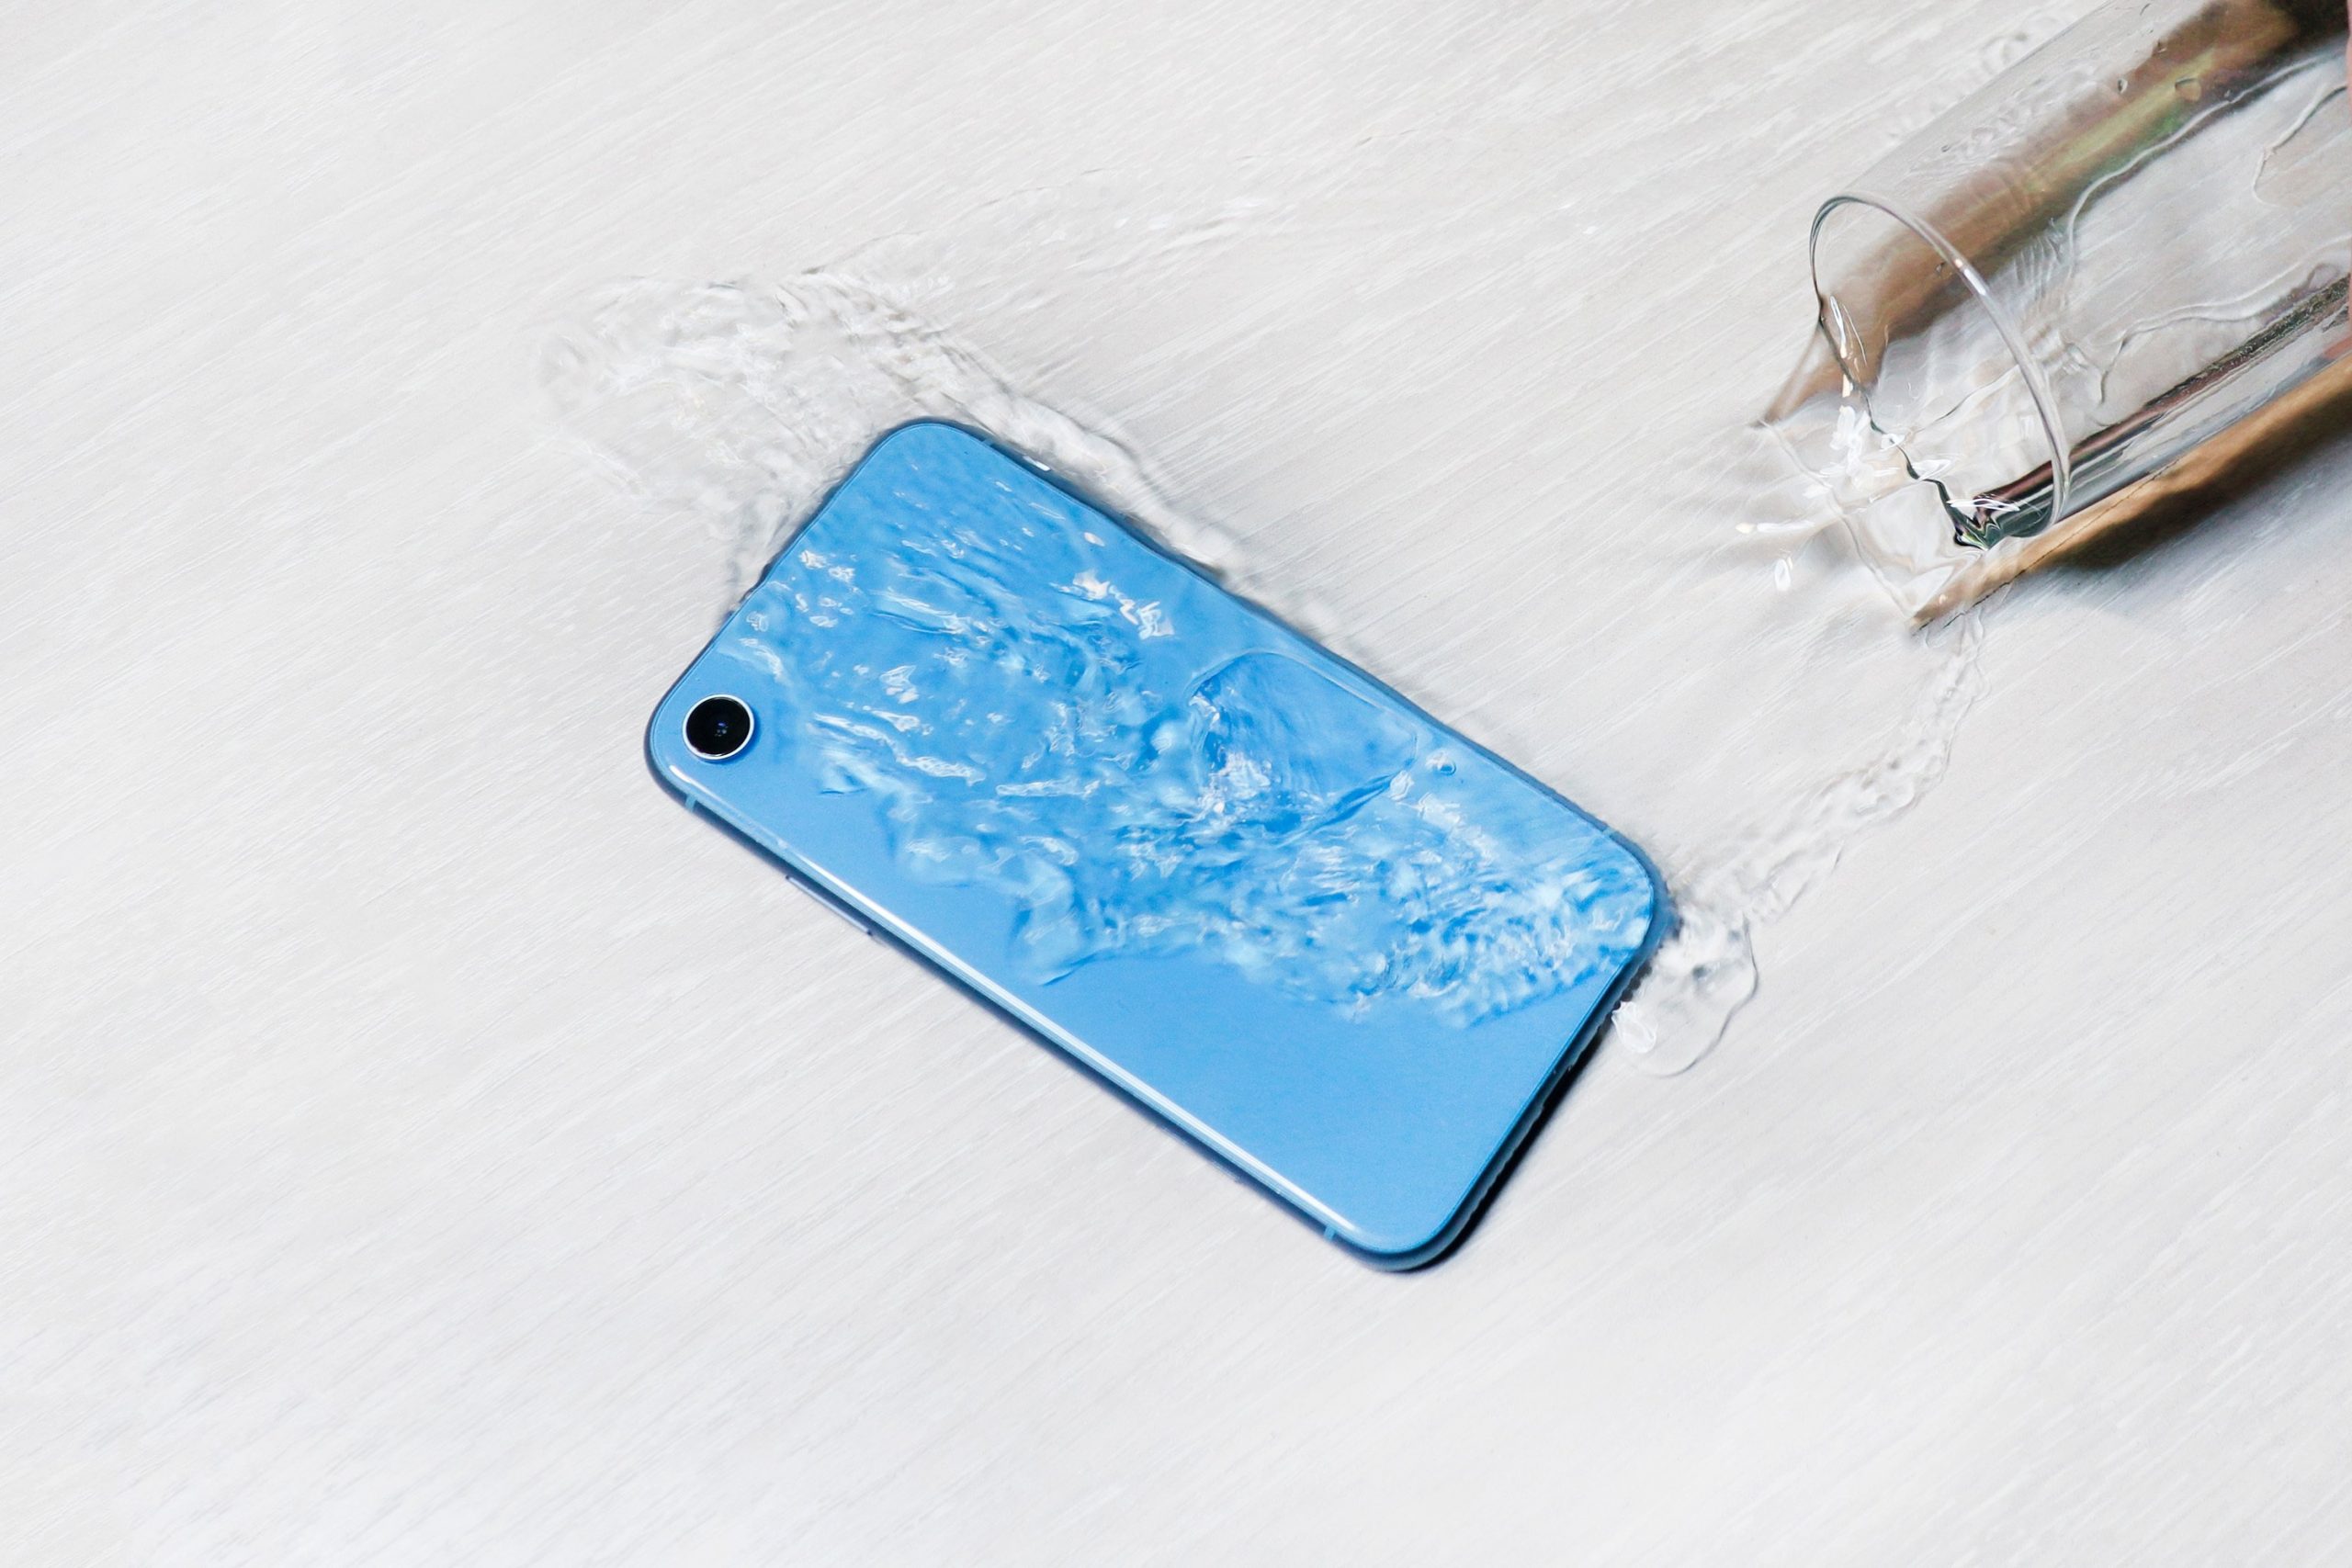 How To Save a wet Phone